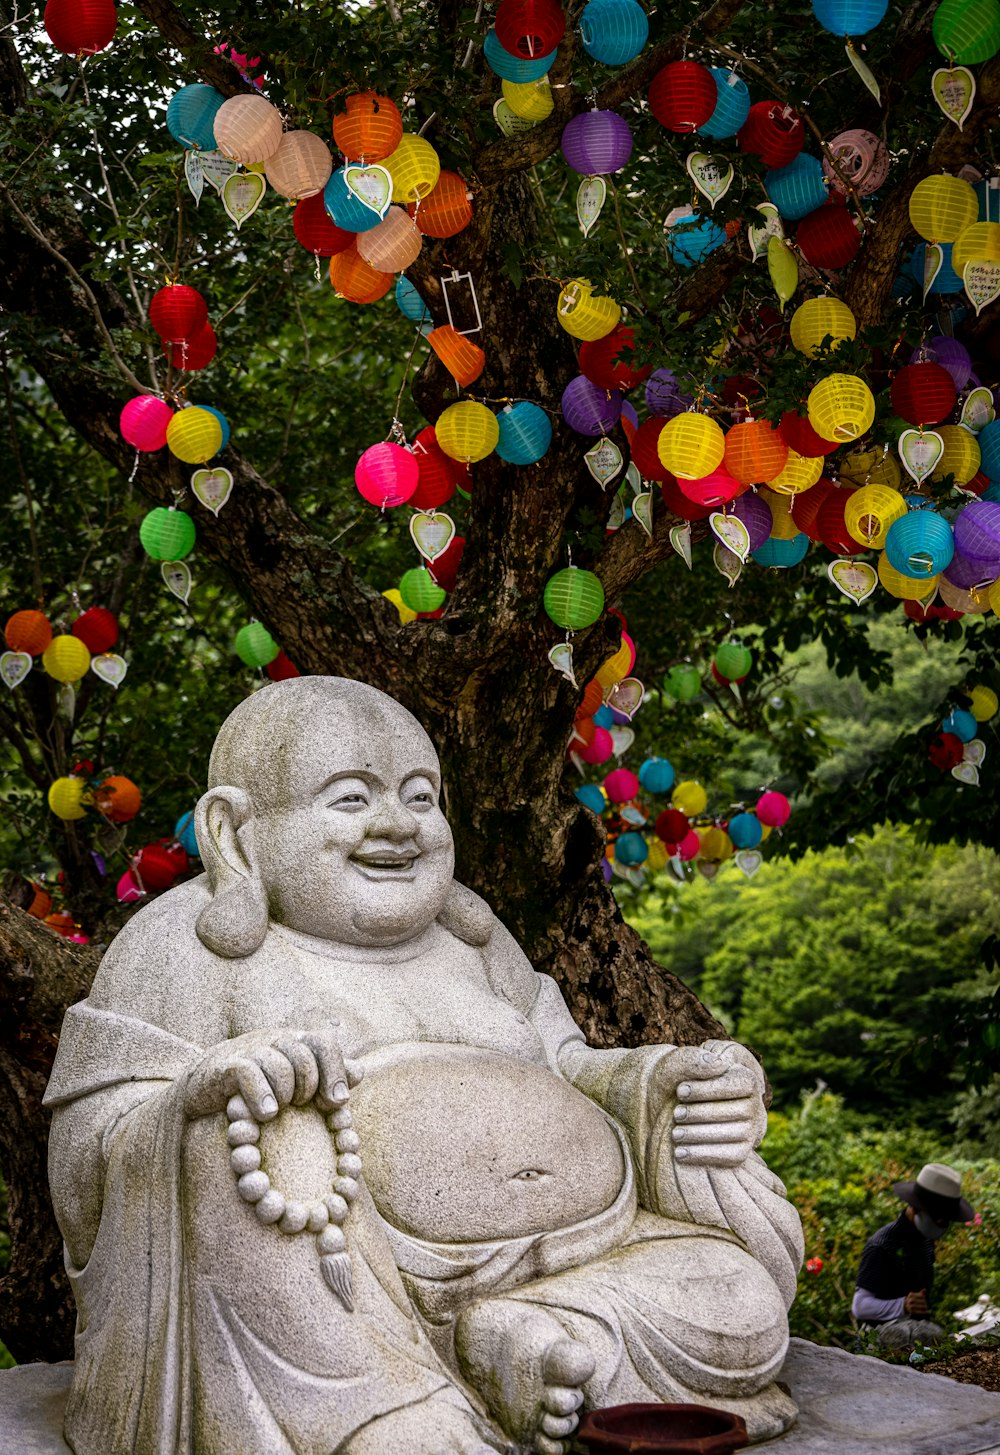 a statue of a person under a tree with colorful ornaments